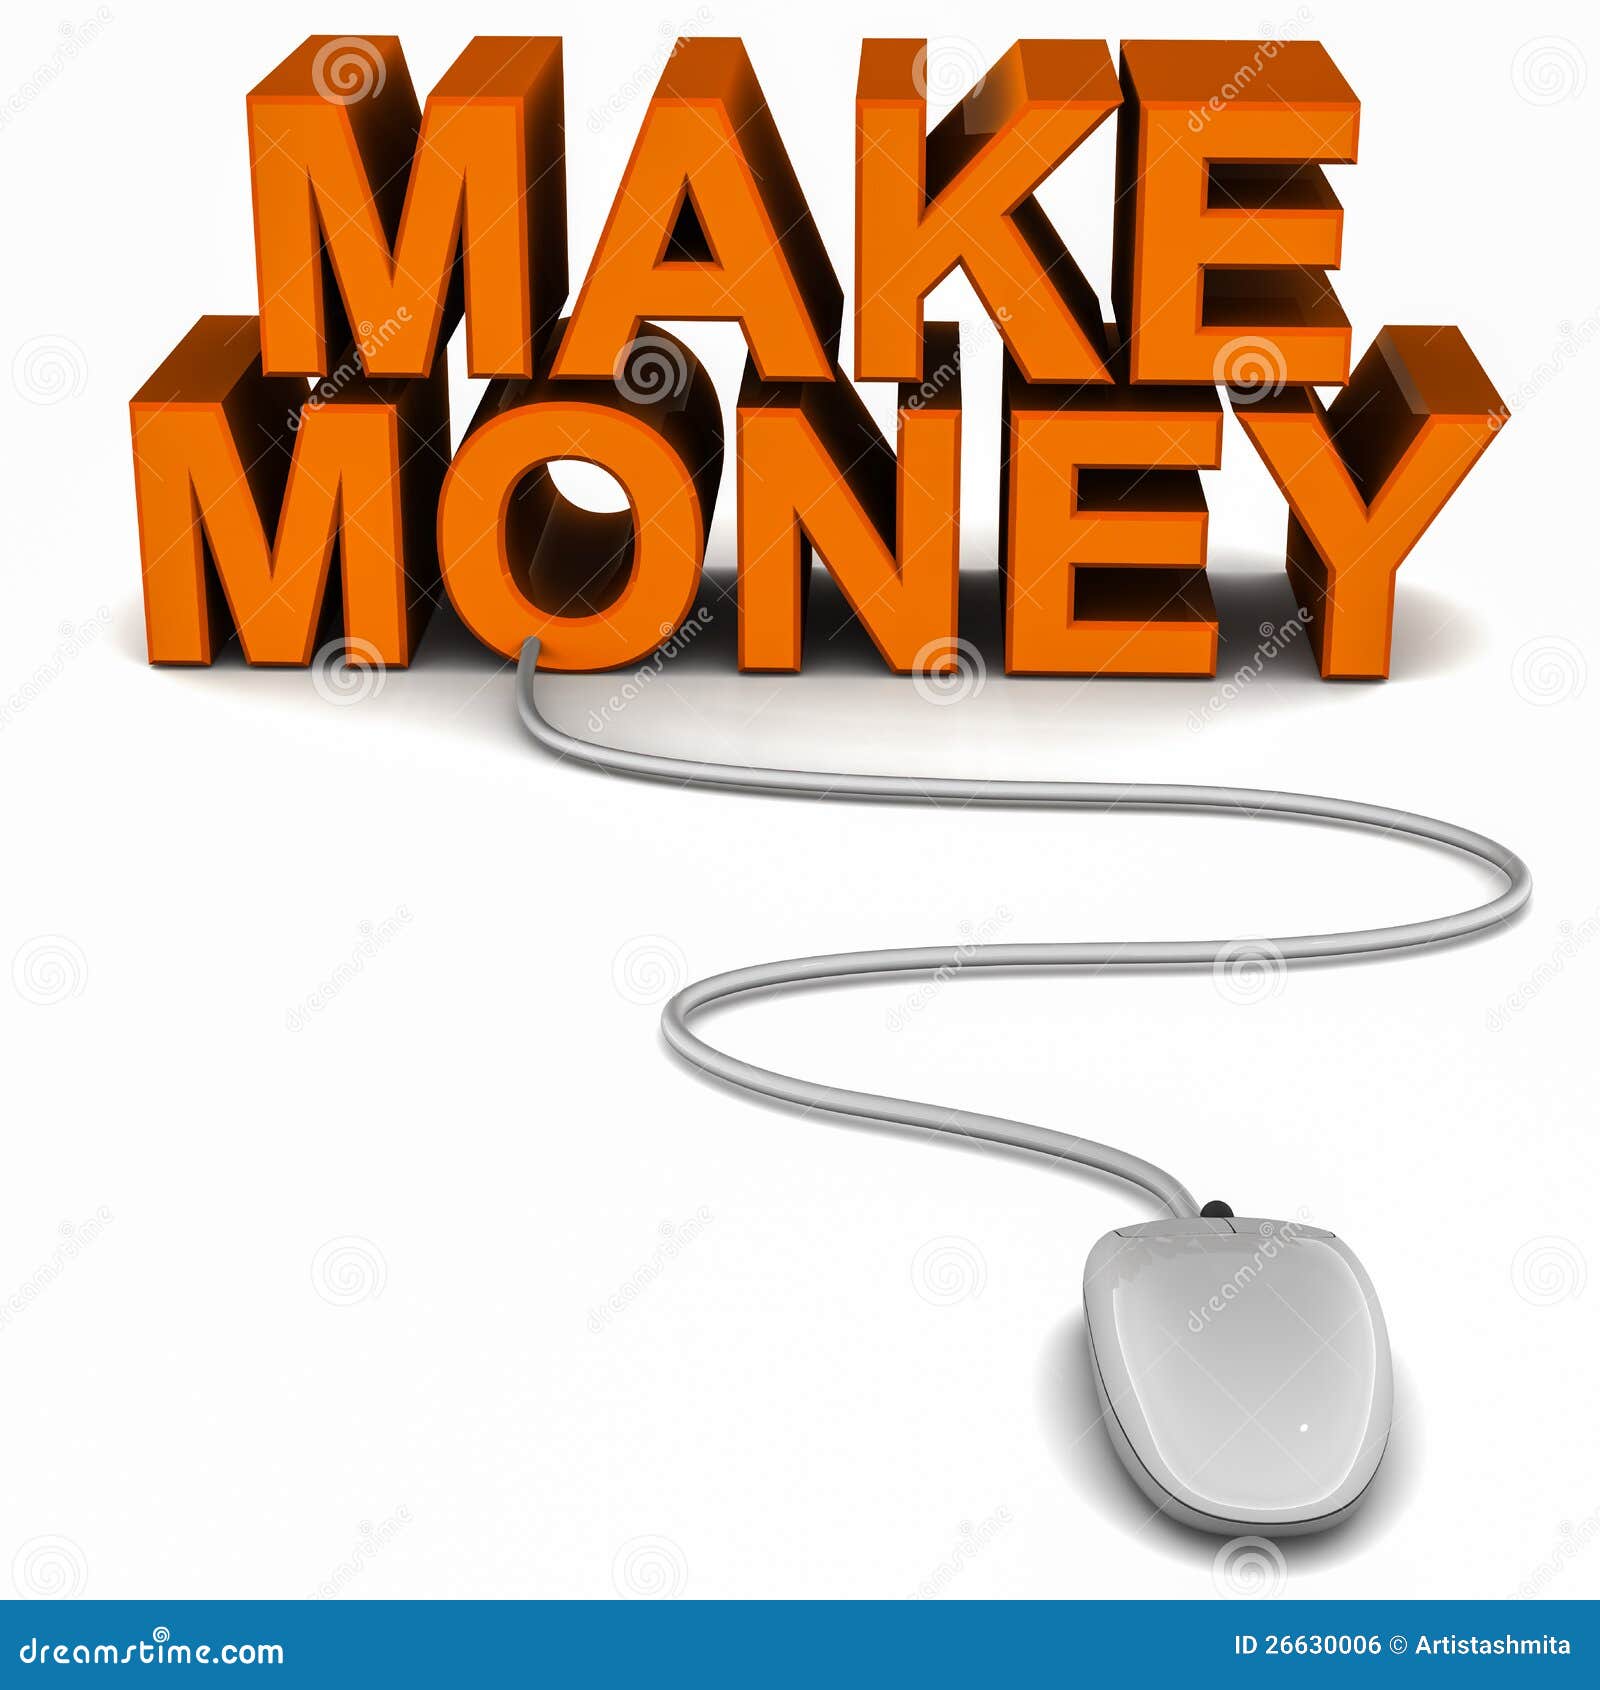 Download this Earn Online Make Money Through Inter Web Based Business picture